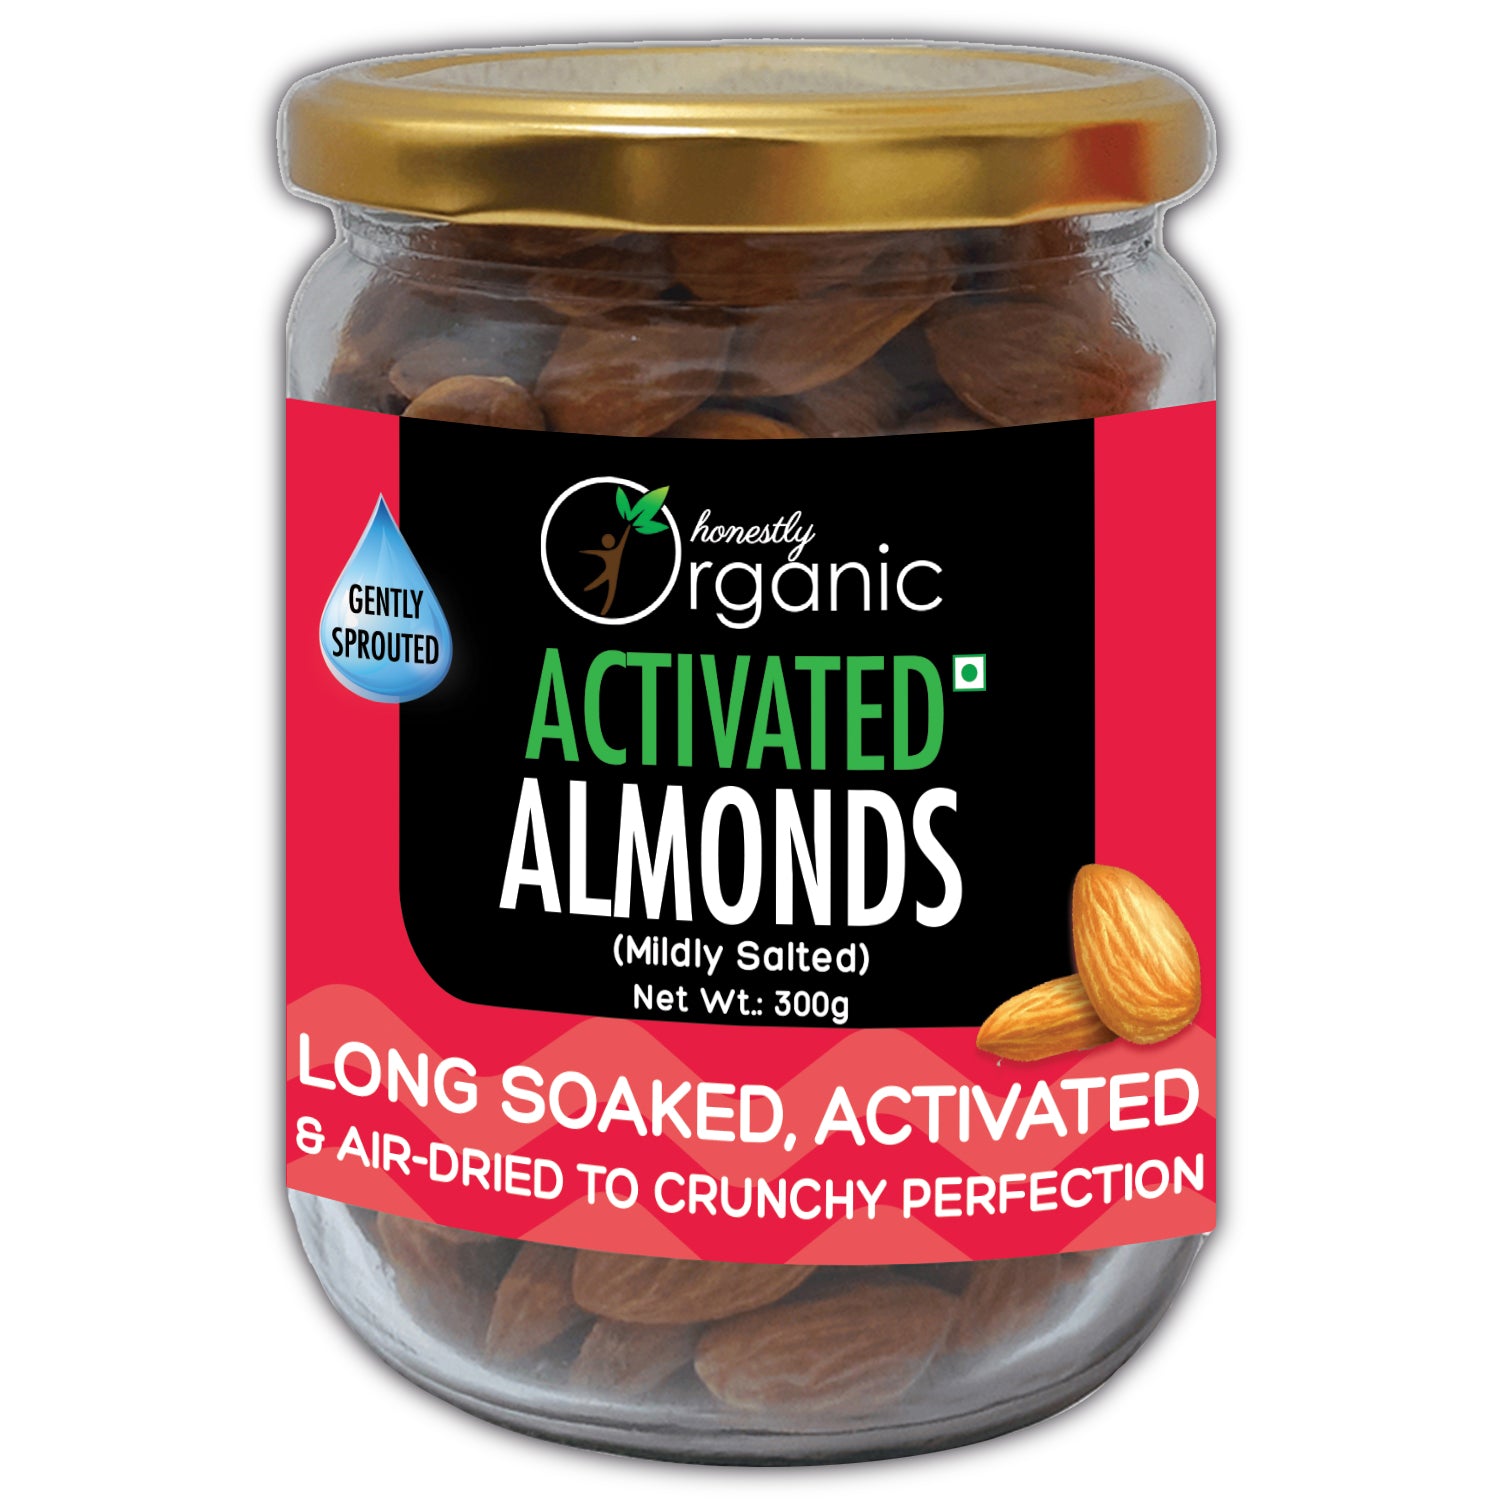 D-Alive Organic Almonds | Activated/Sprouted | Mildly Salted (Long Soaked & Air Dried)